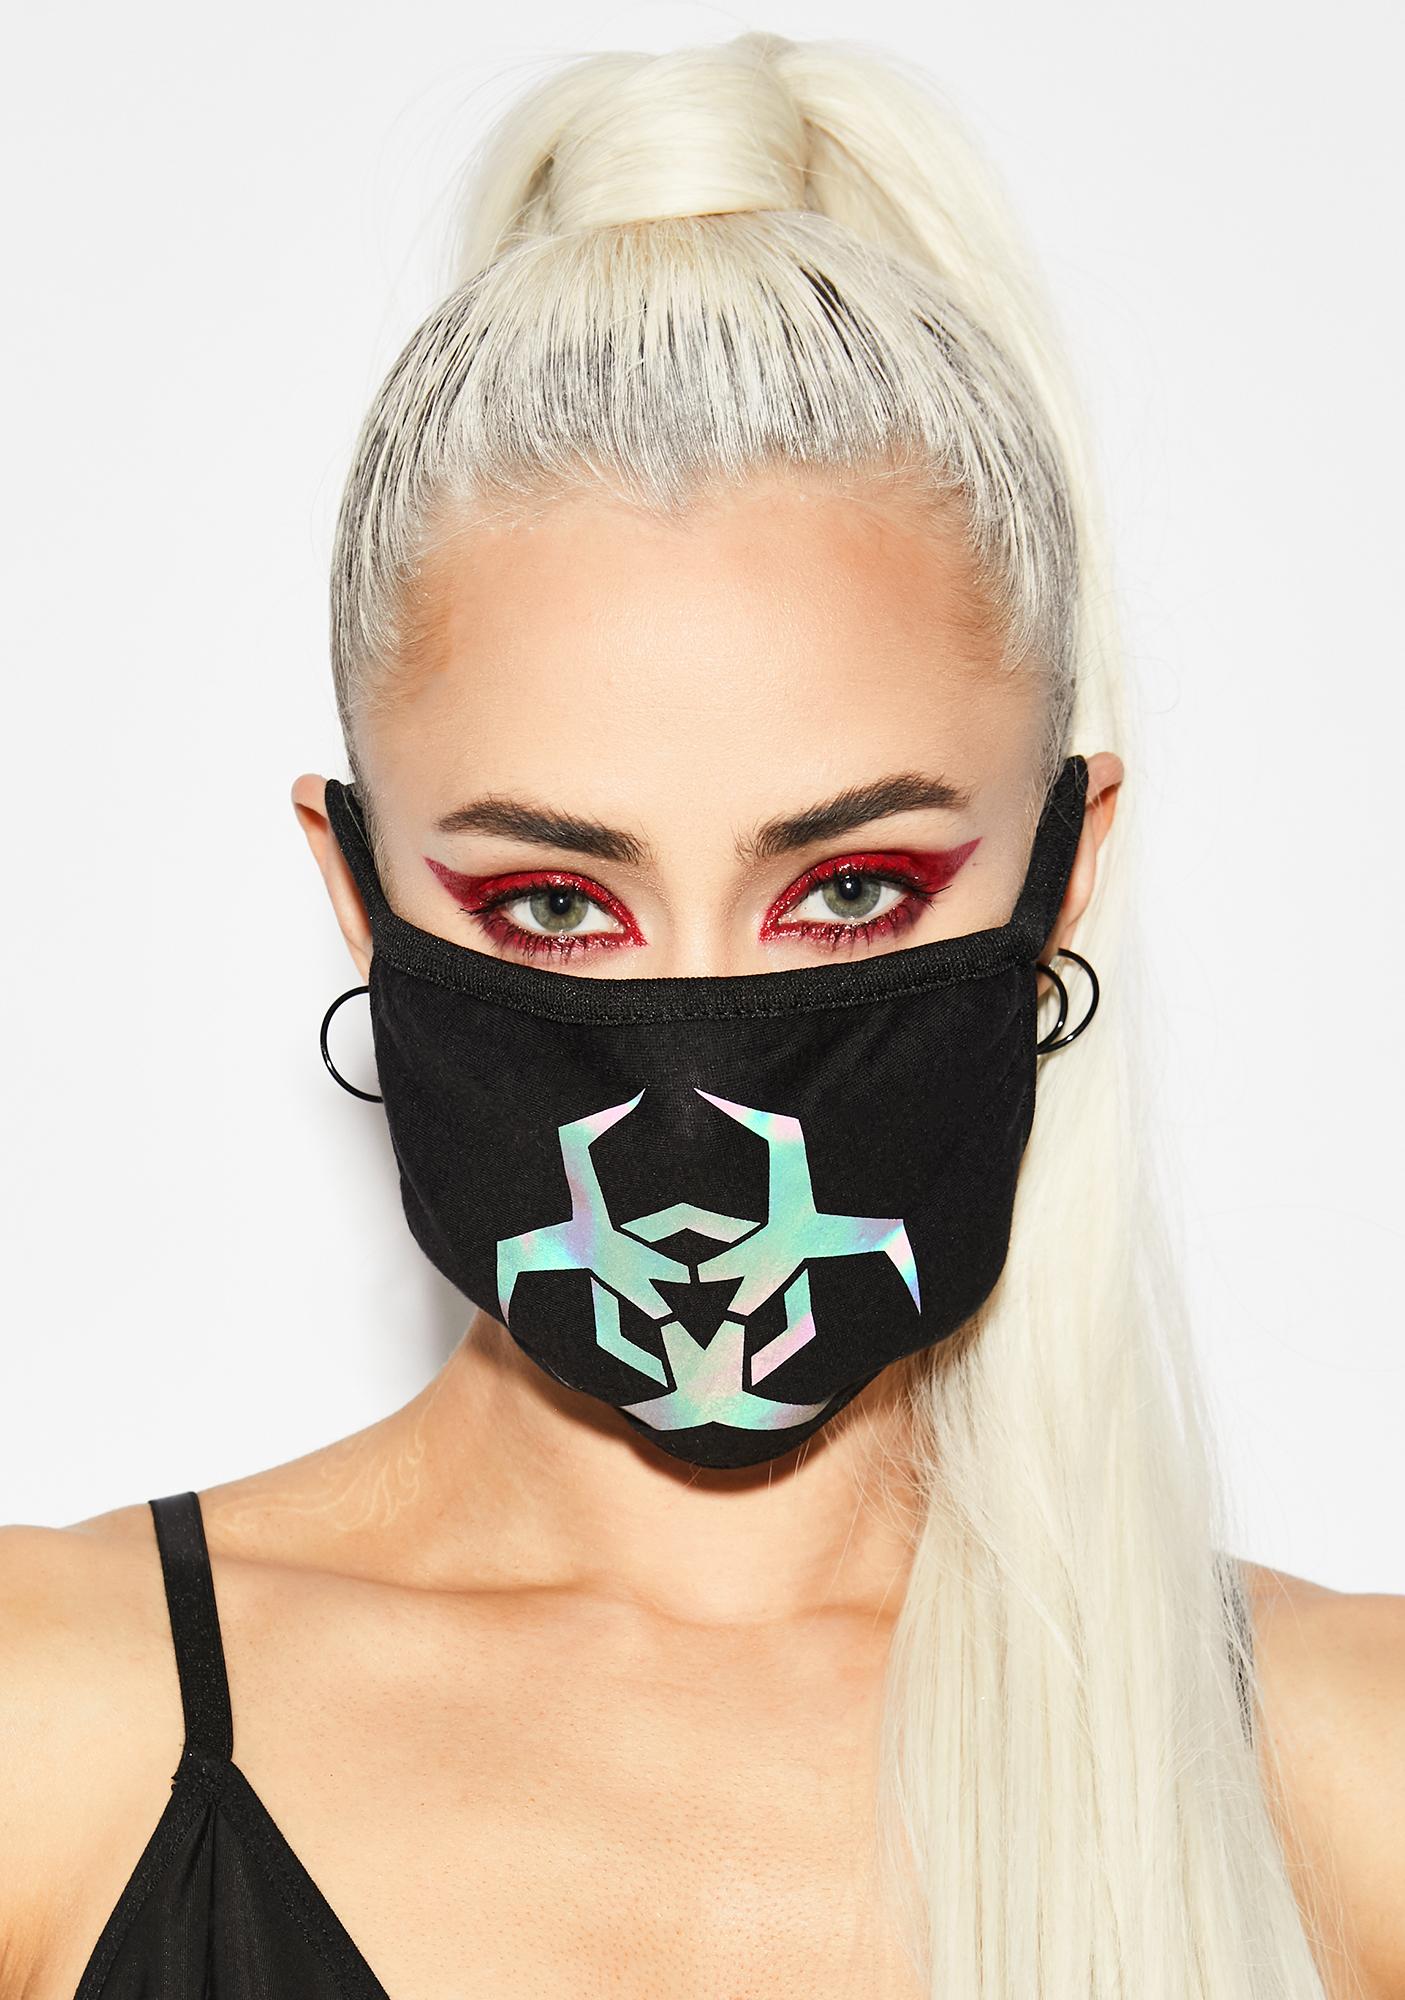 Creeper Mouth Face Mask